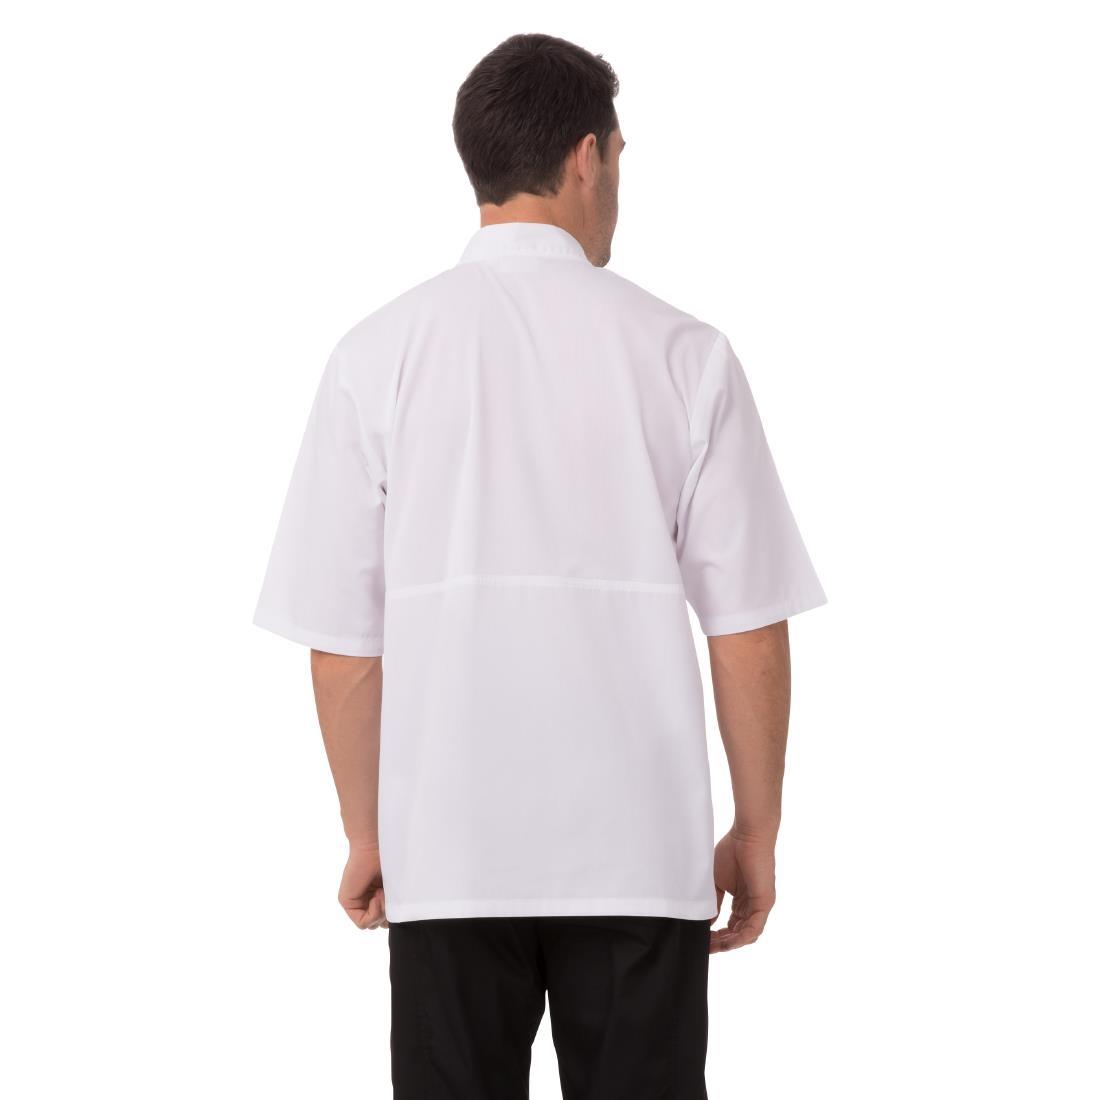 Chefs Works Montreal Cool Vent Unisex Short Sleeve Chefs Jacket White XS - A914-XS  - 3